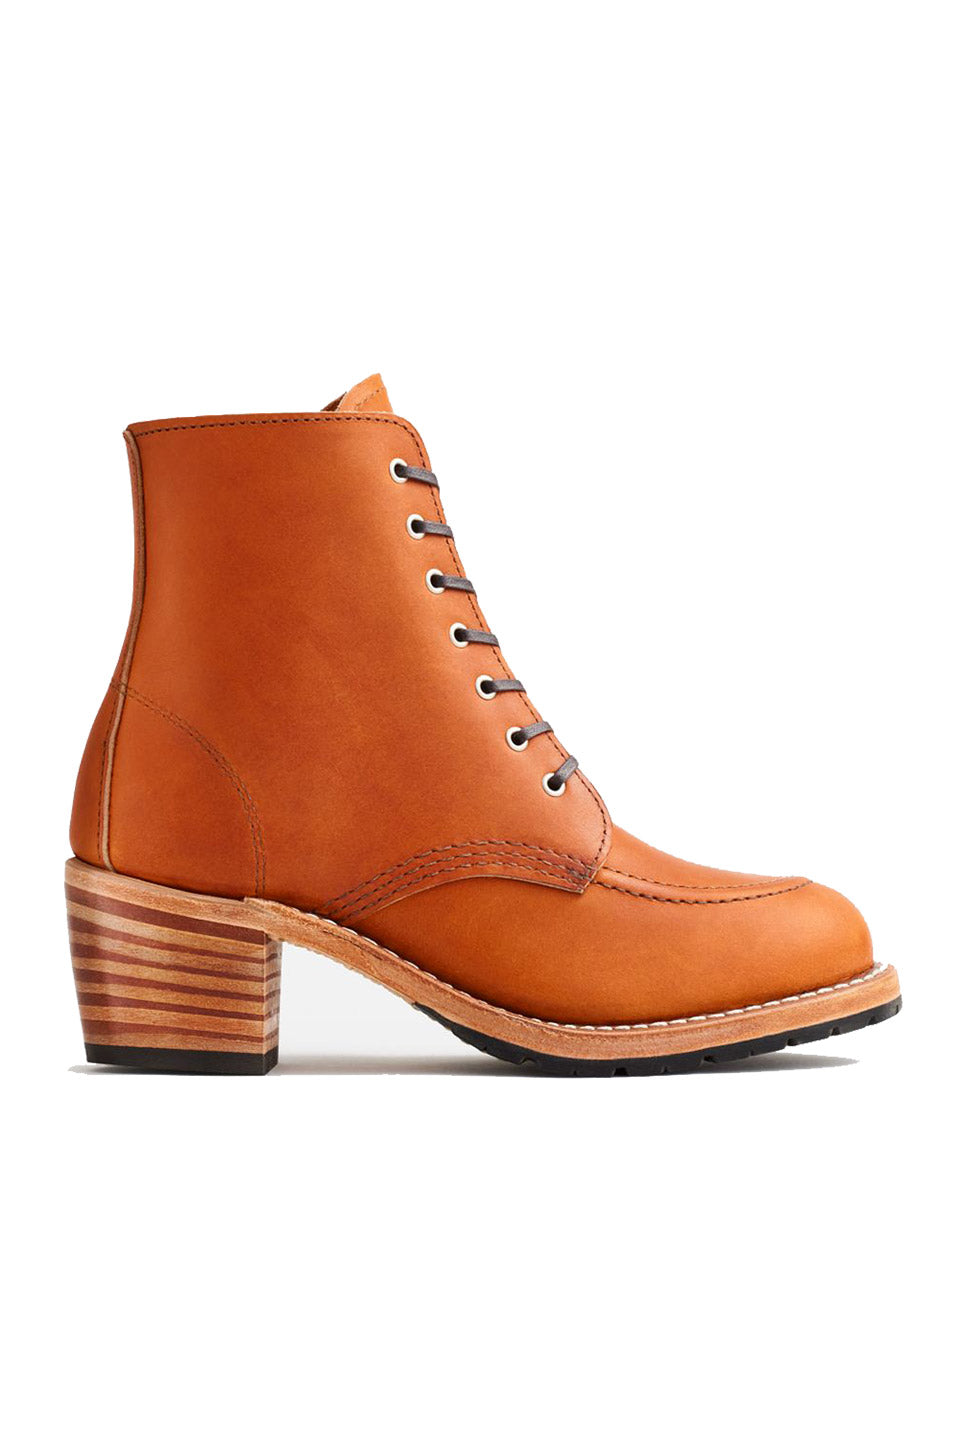 Red Wing - Clara Boot - Oro - Side